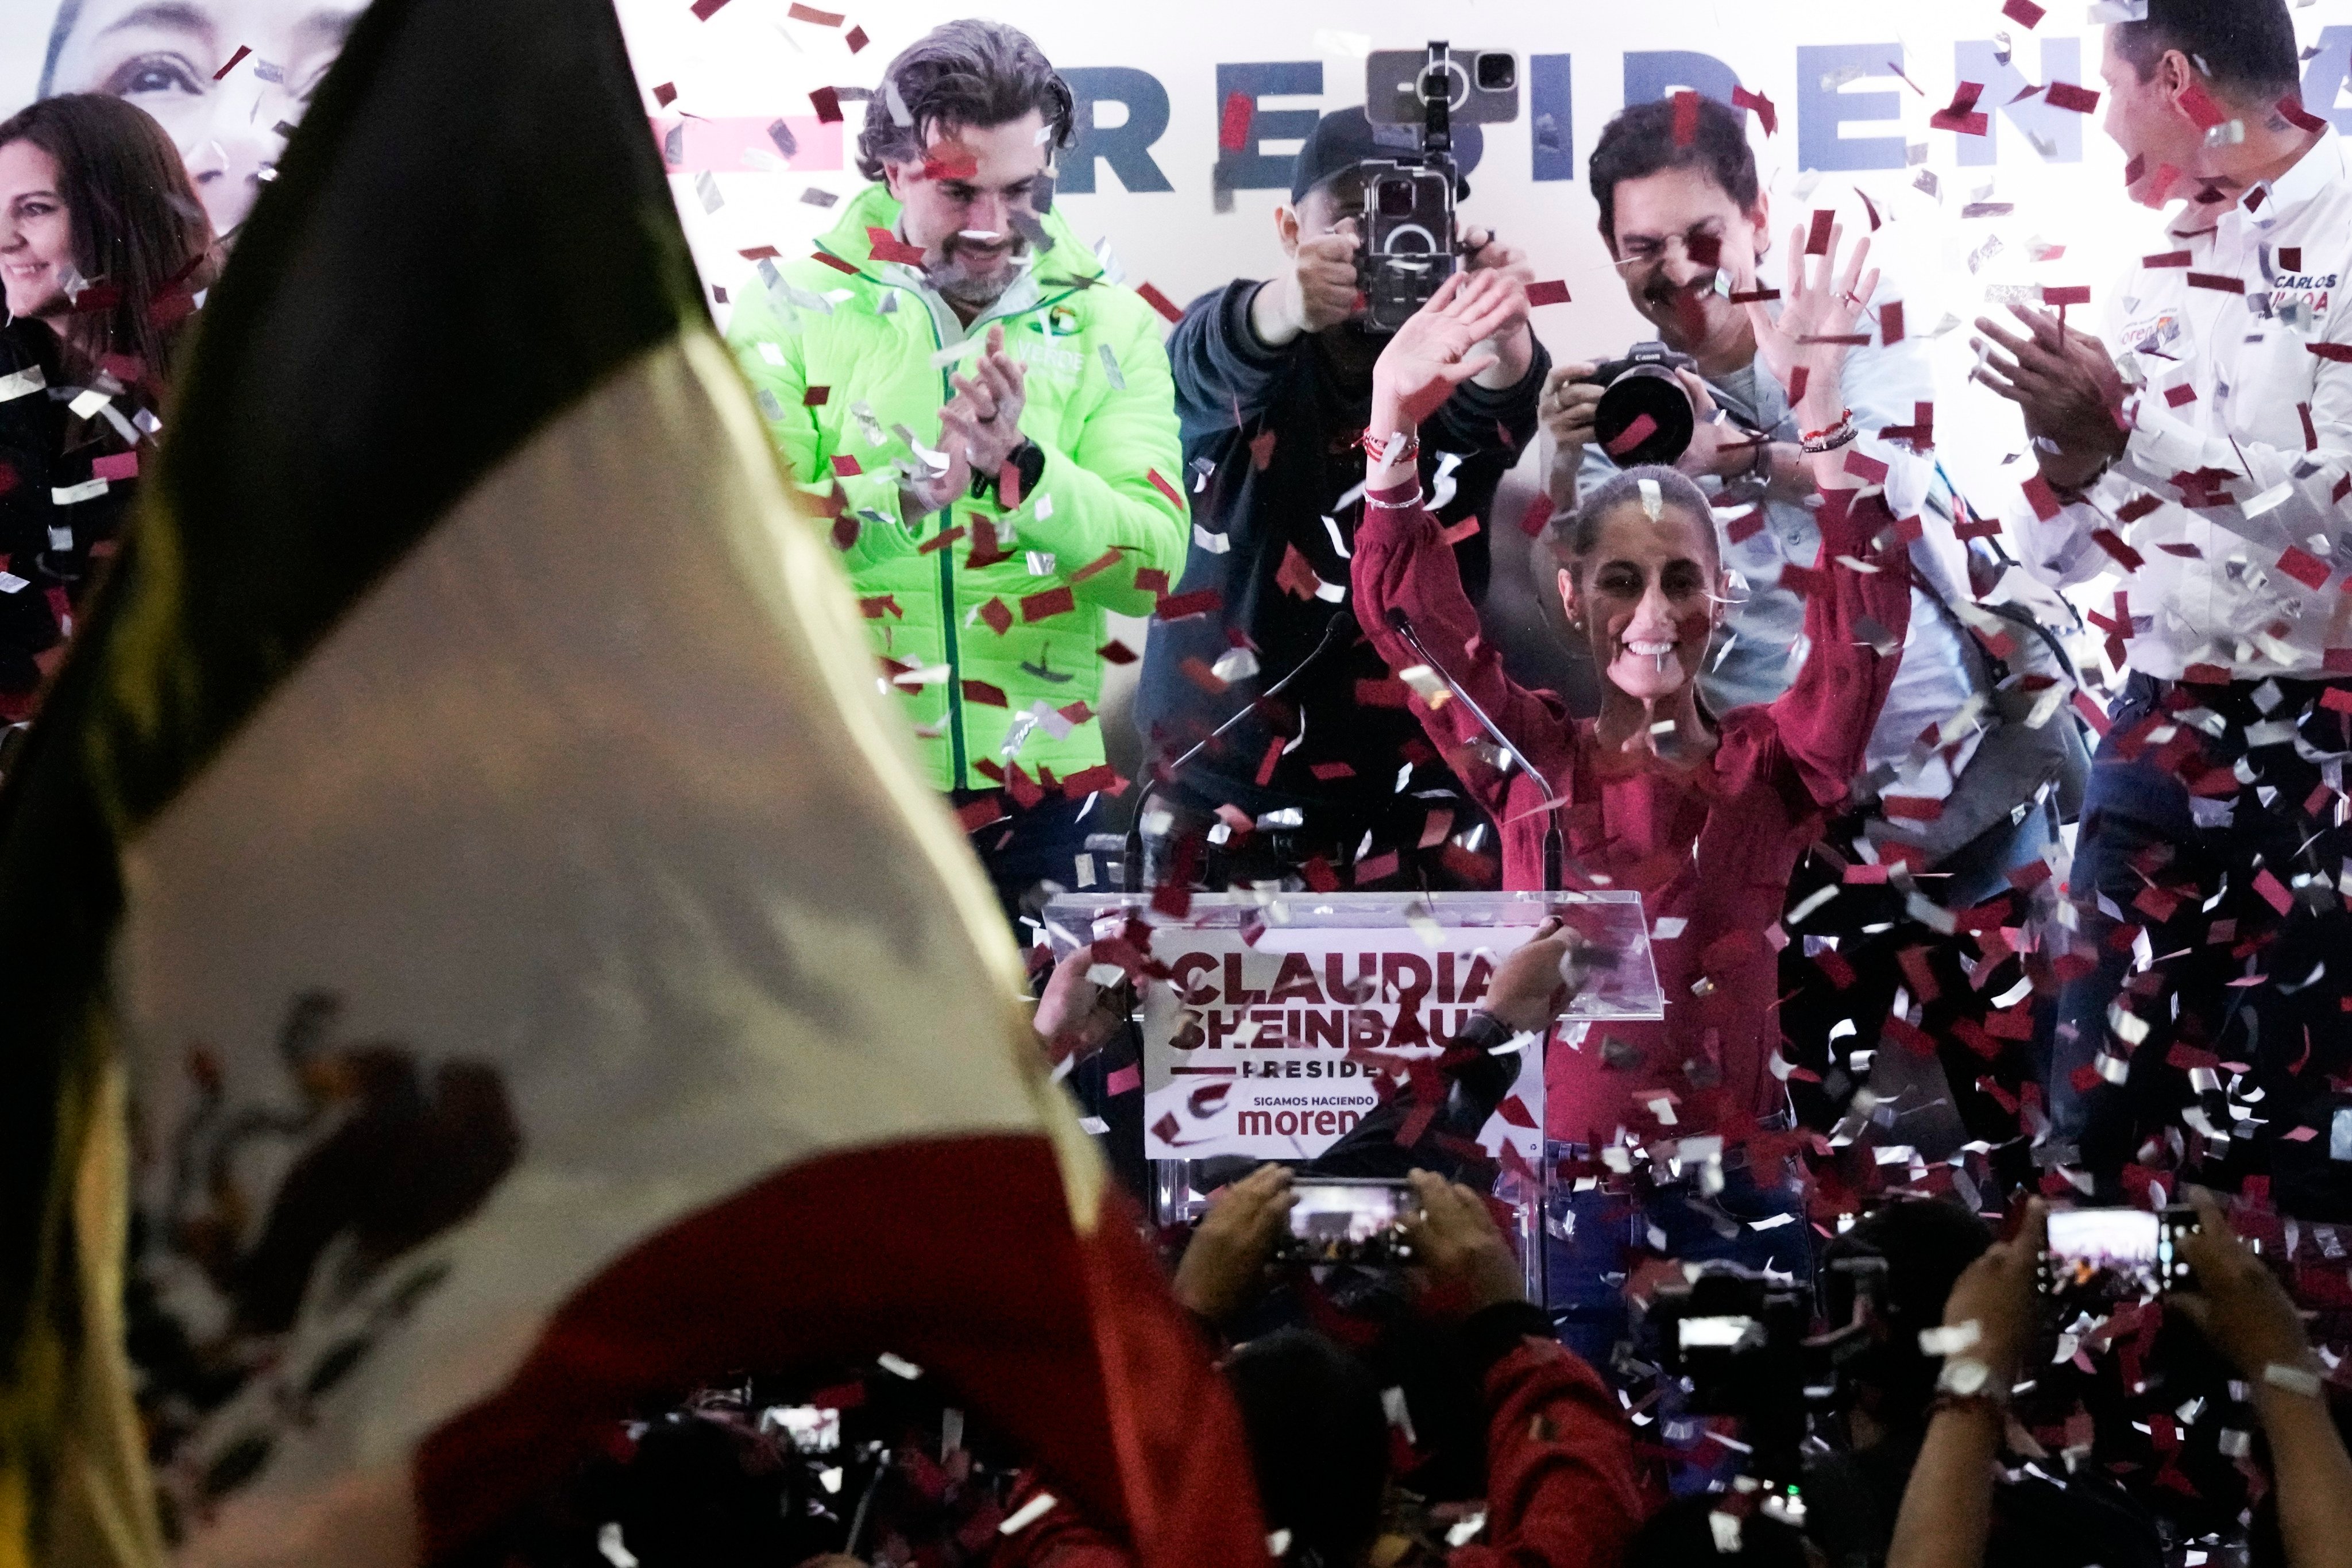 Presidential hopeful Claudia Sheinbaum at her campaign rally in Mexico City. Photo: ap